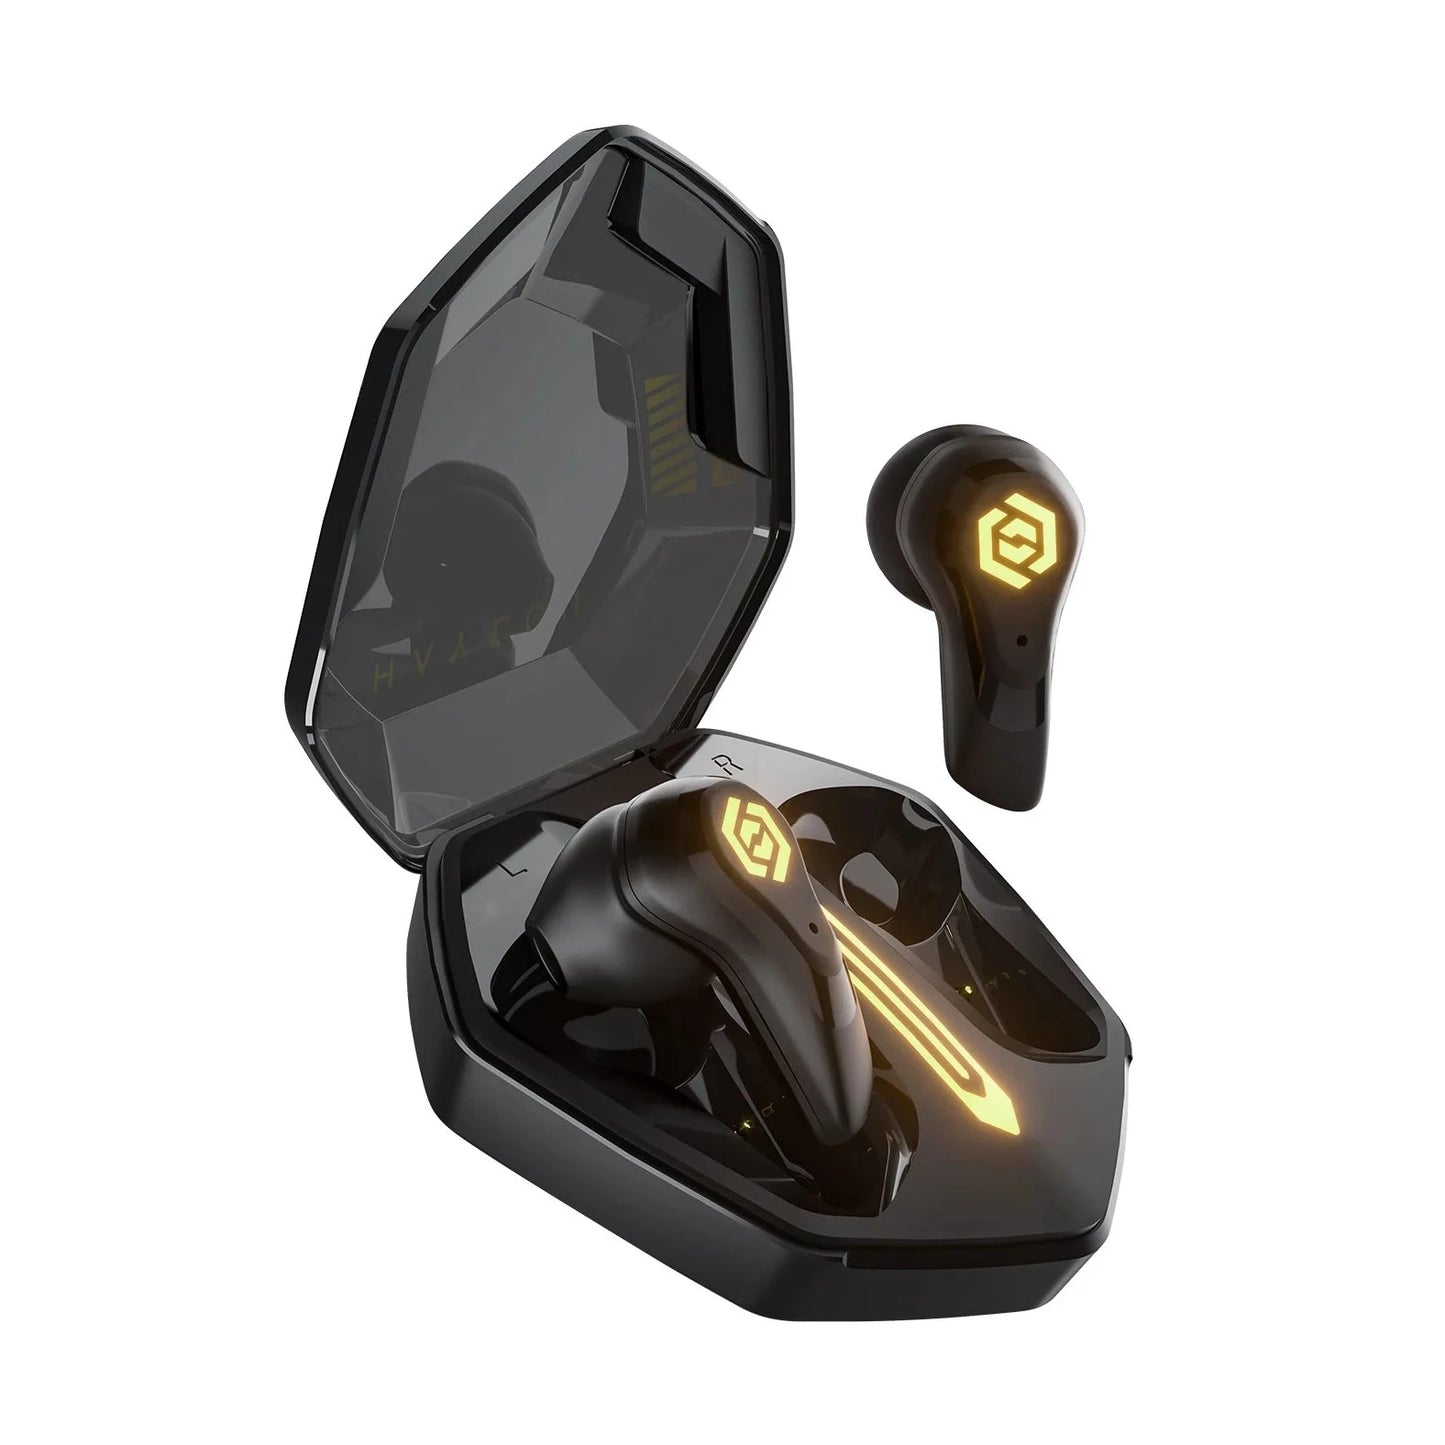 HAYLOU G3 True Wireless Gaming Earbuds | Reframe Your Gaming Experience